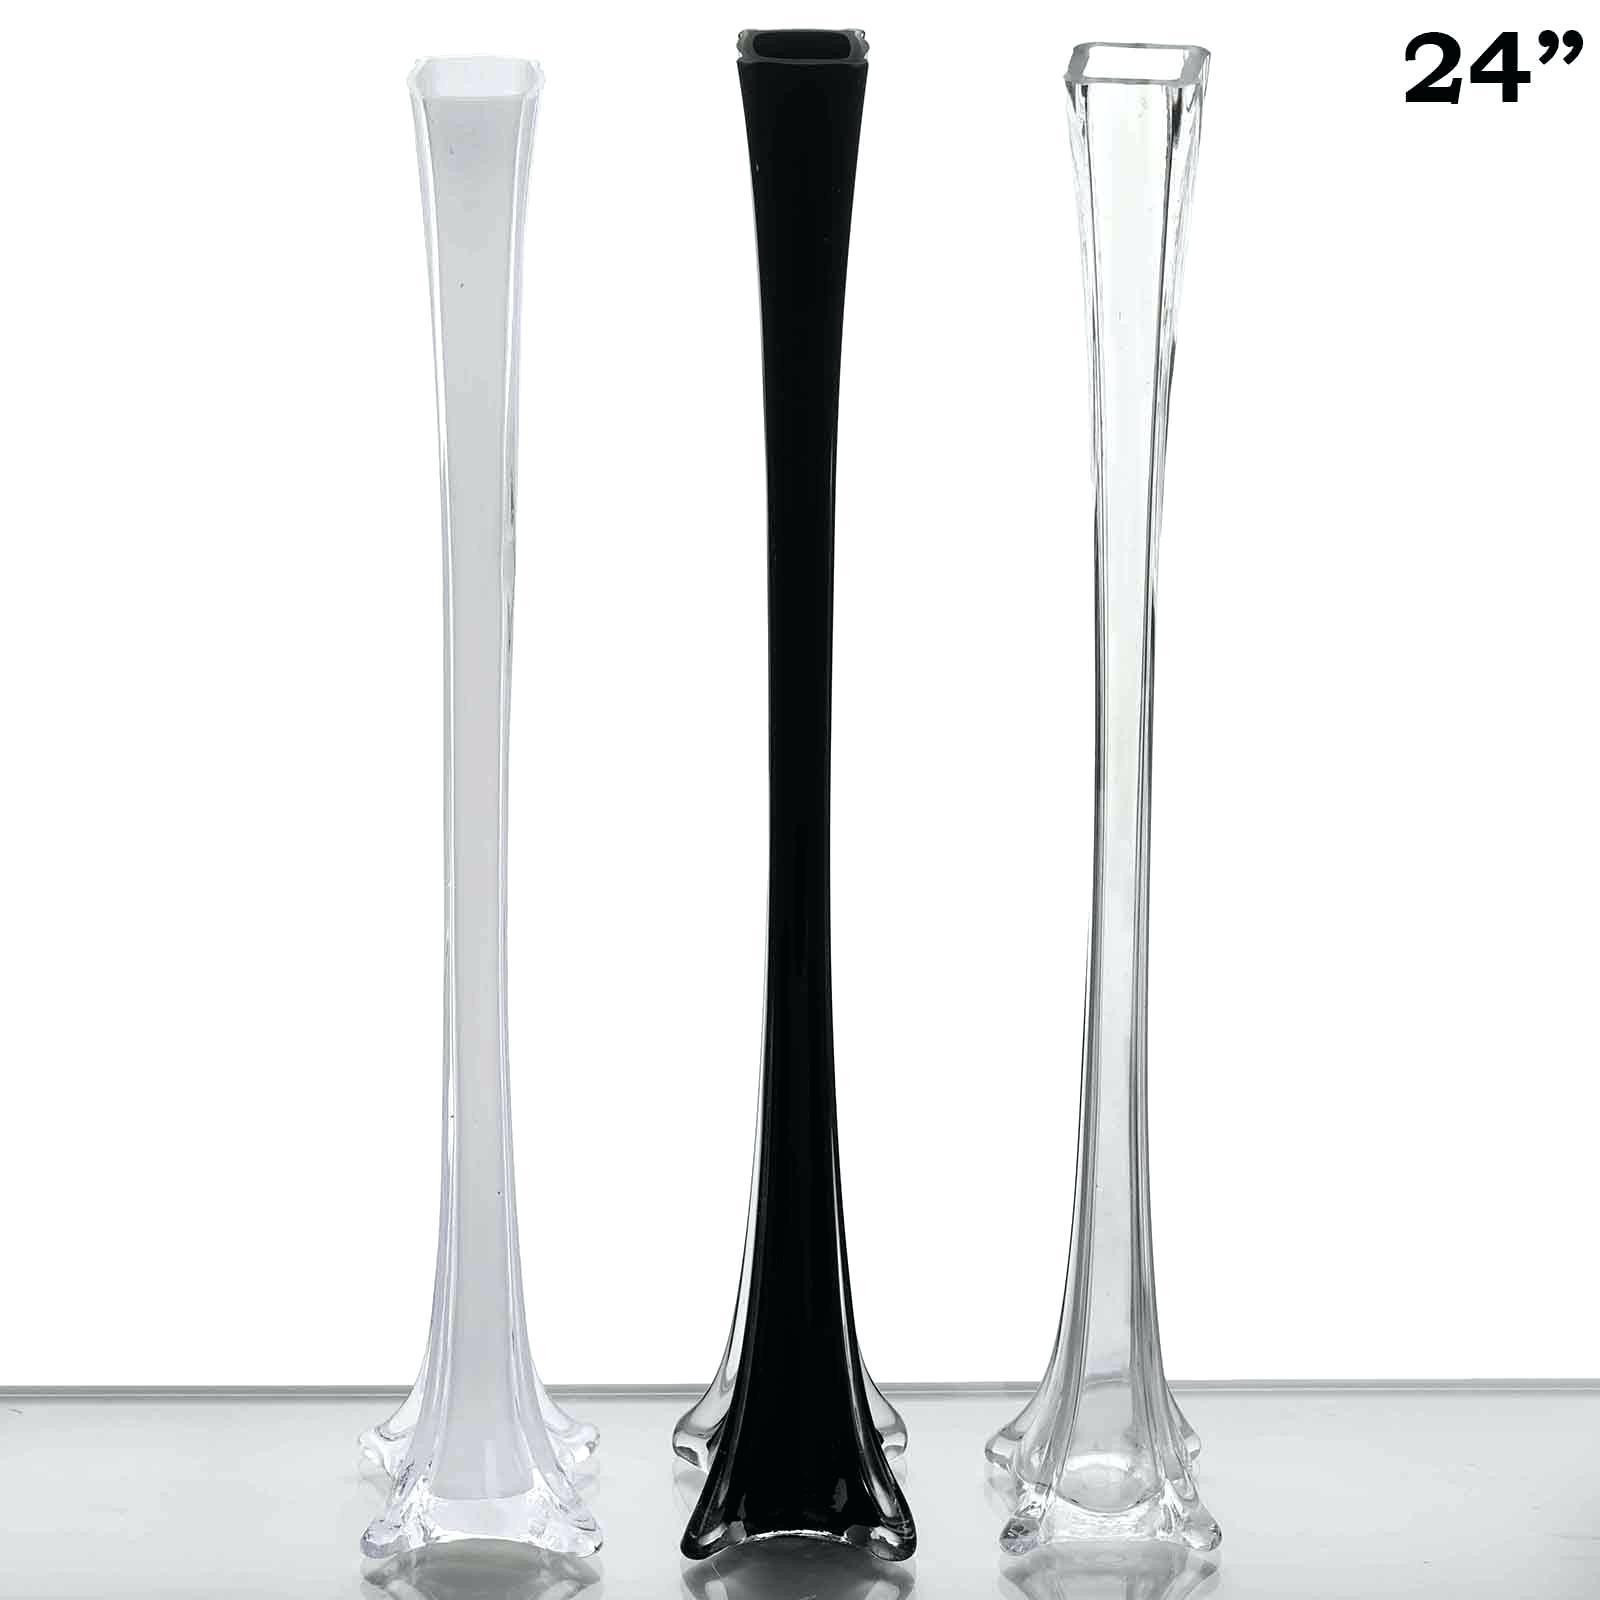 art deco glass vases for sale of black glass vases photos vases flower vase coloring page pages intended for black glass vases stock fantastic chair decor ideas from living room vases wholesale awesome of black